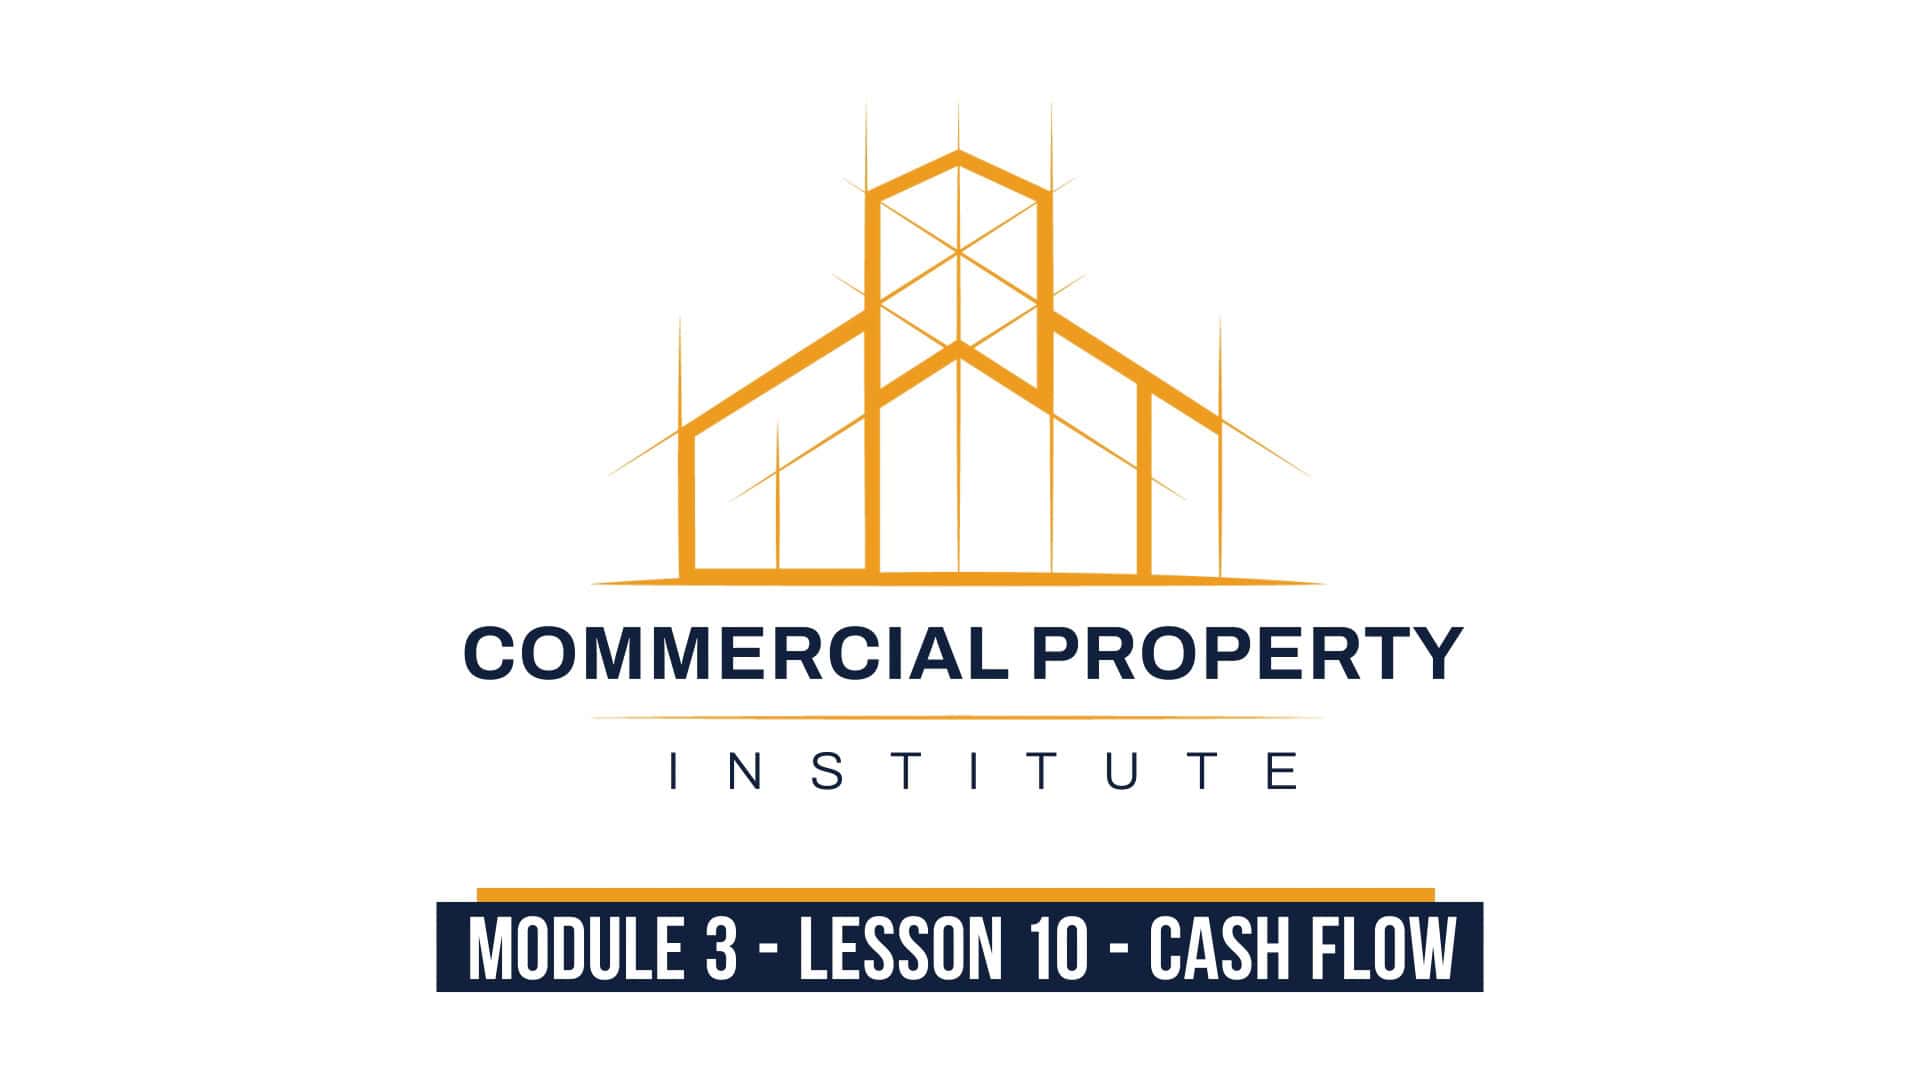 thumb of commercial property institute